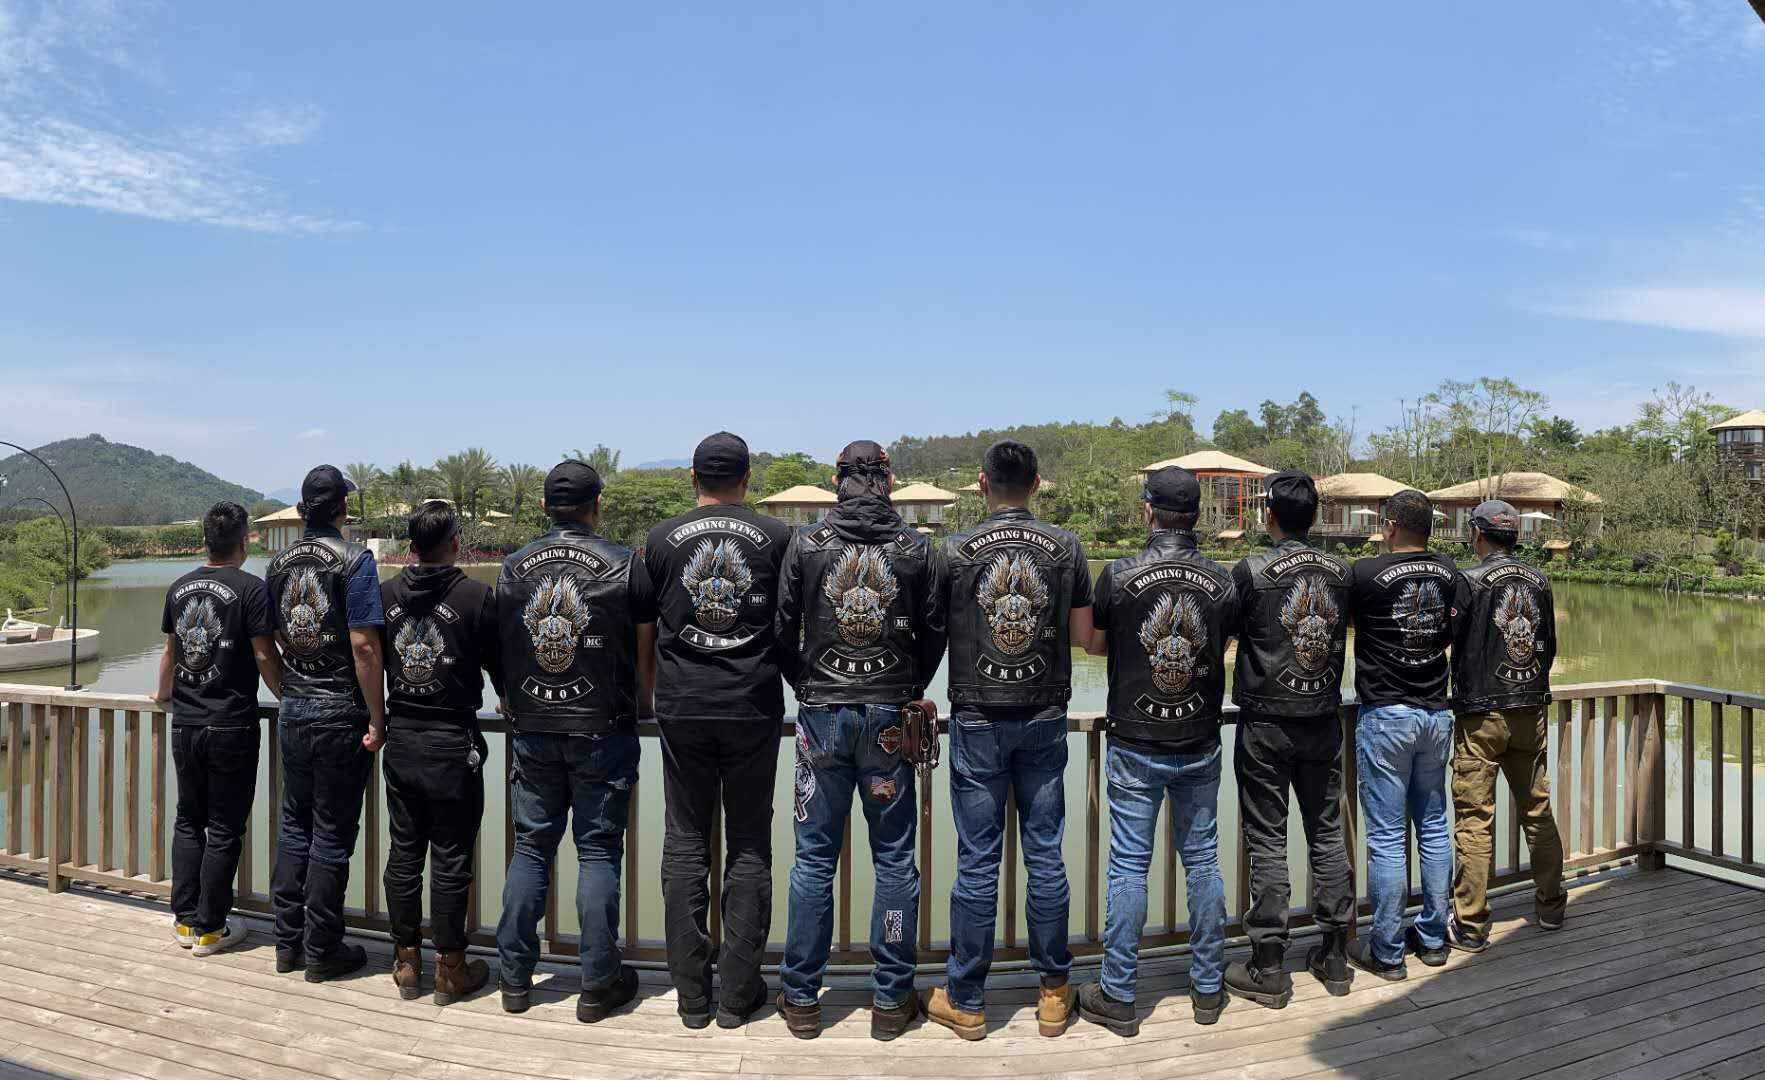 The Allure of Denim Vests: Why Motorcycle Club Members Embrace Them